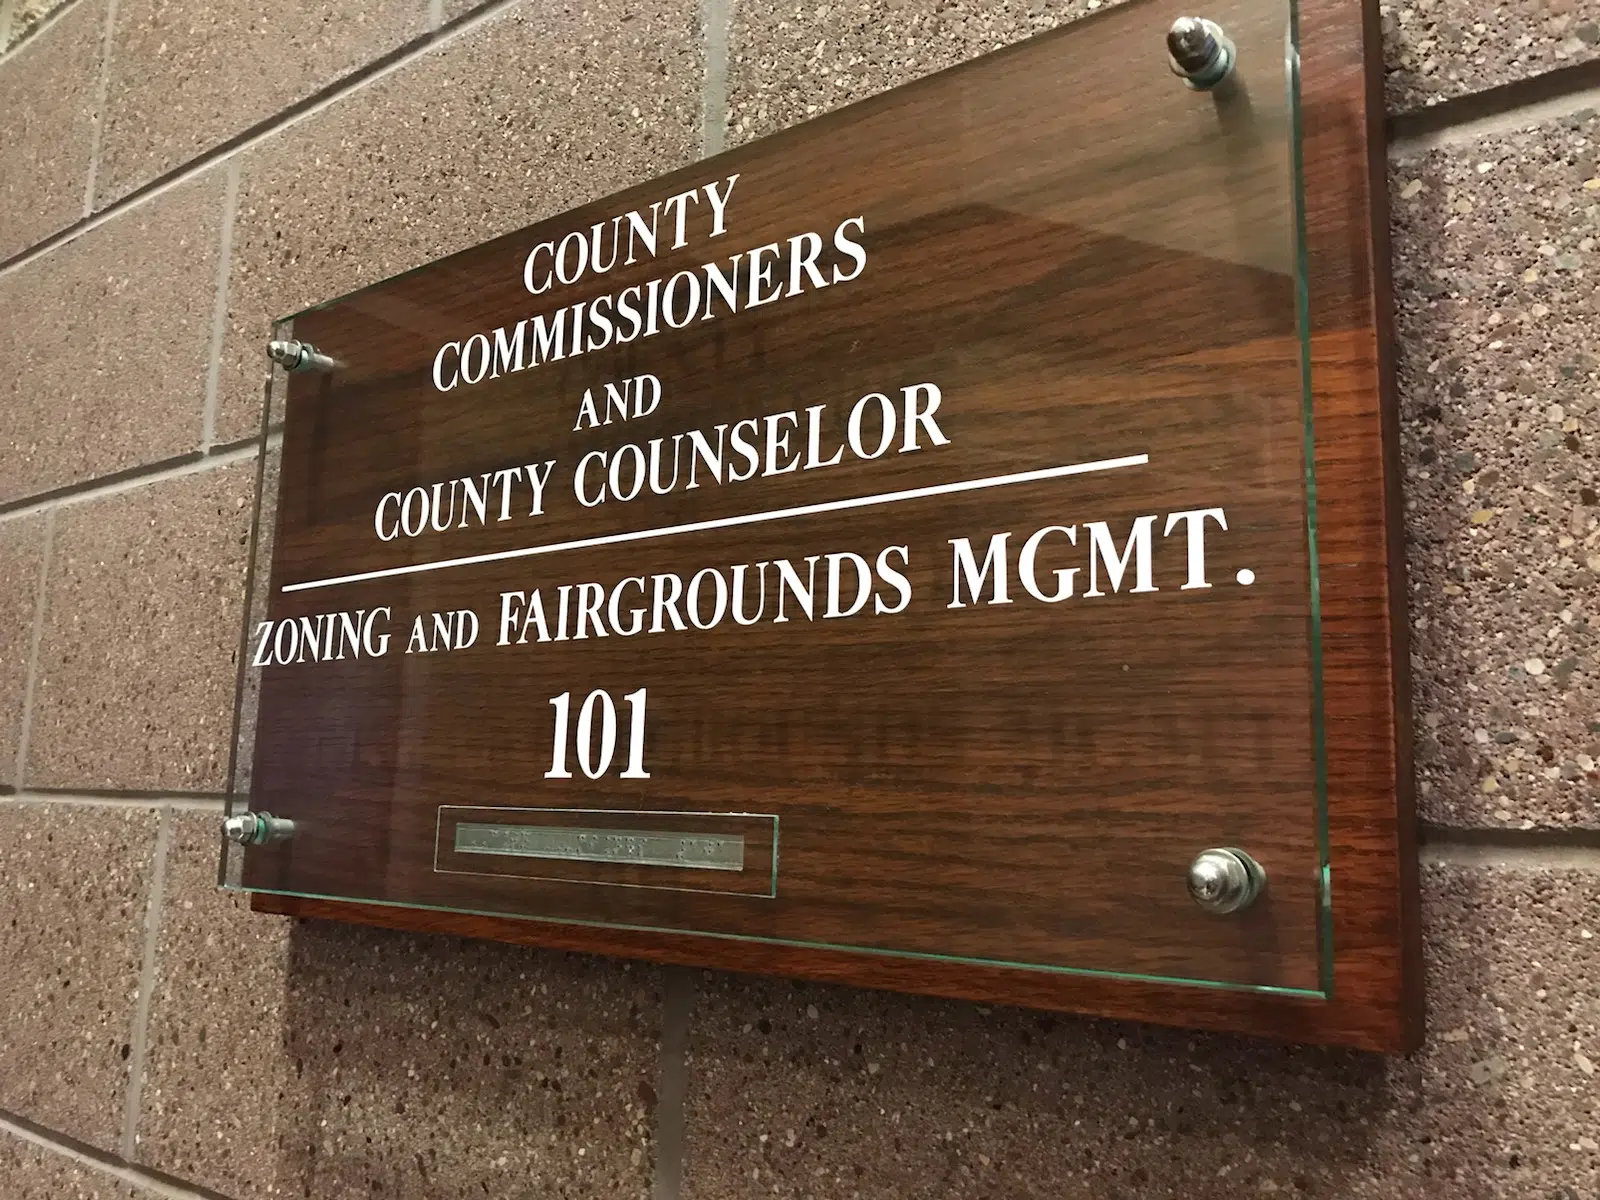 Fire alarm inspections, grant support letters approved by Lyon County Commission